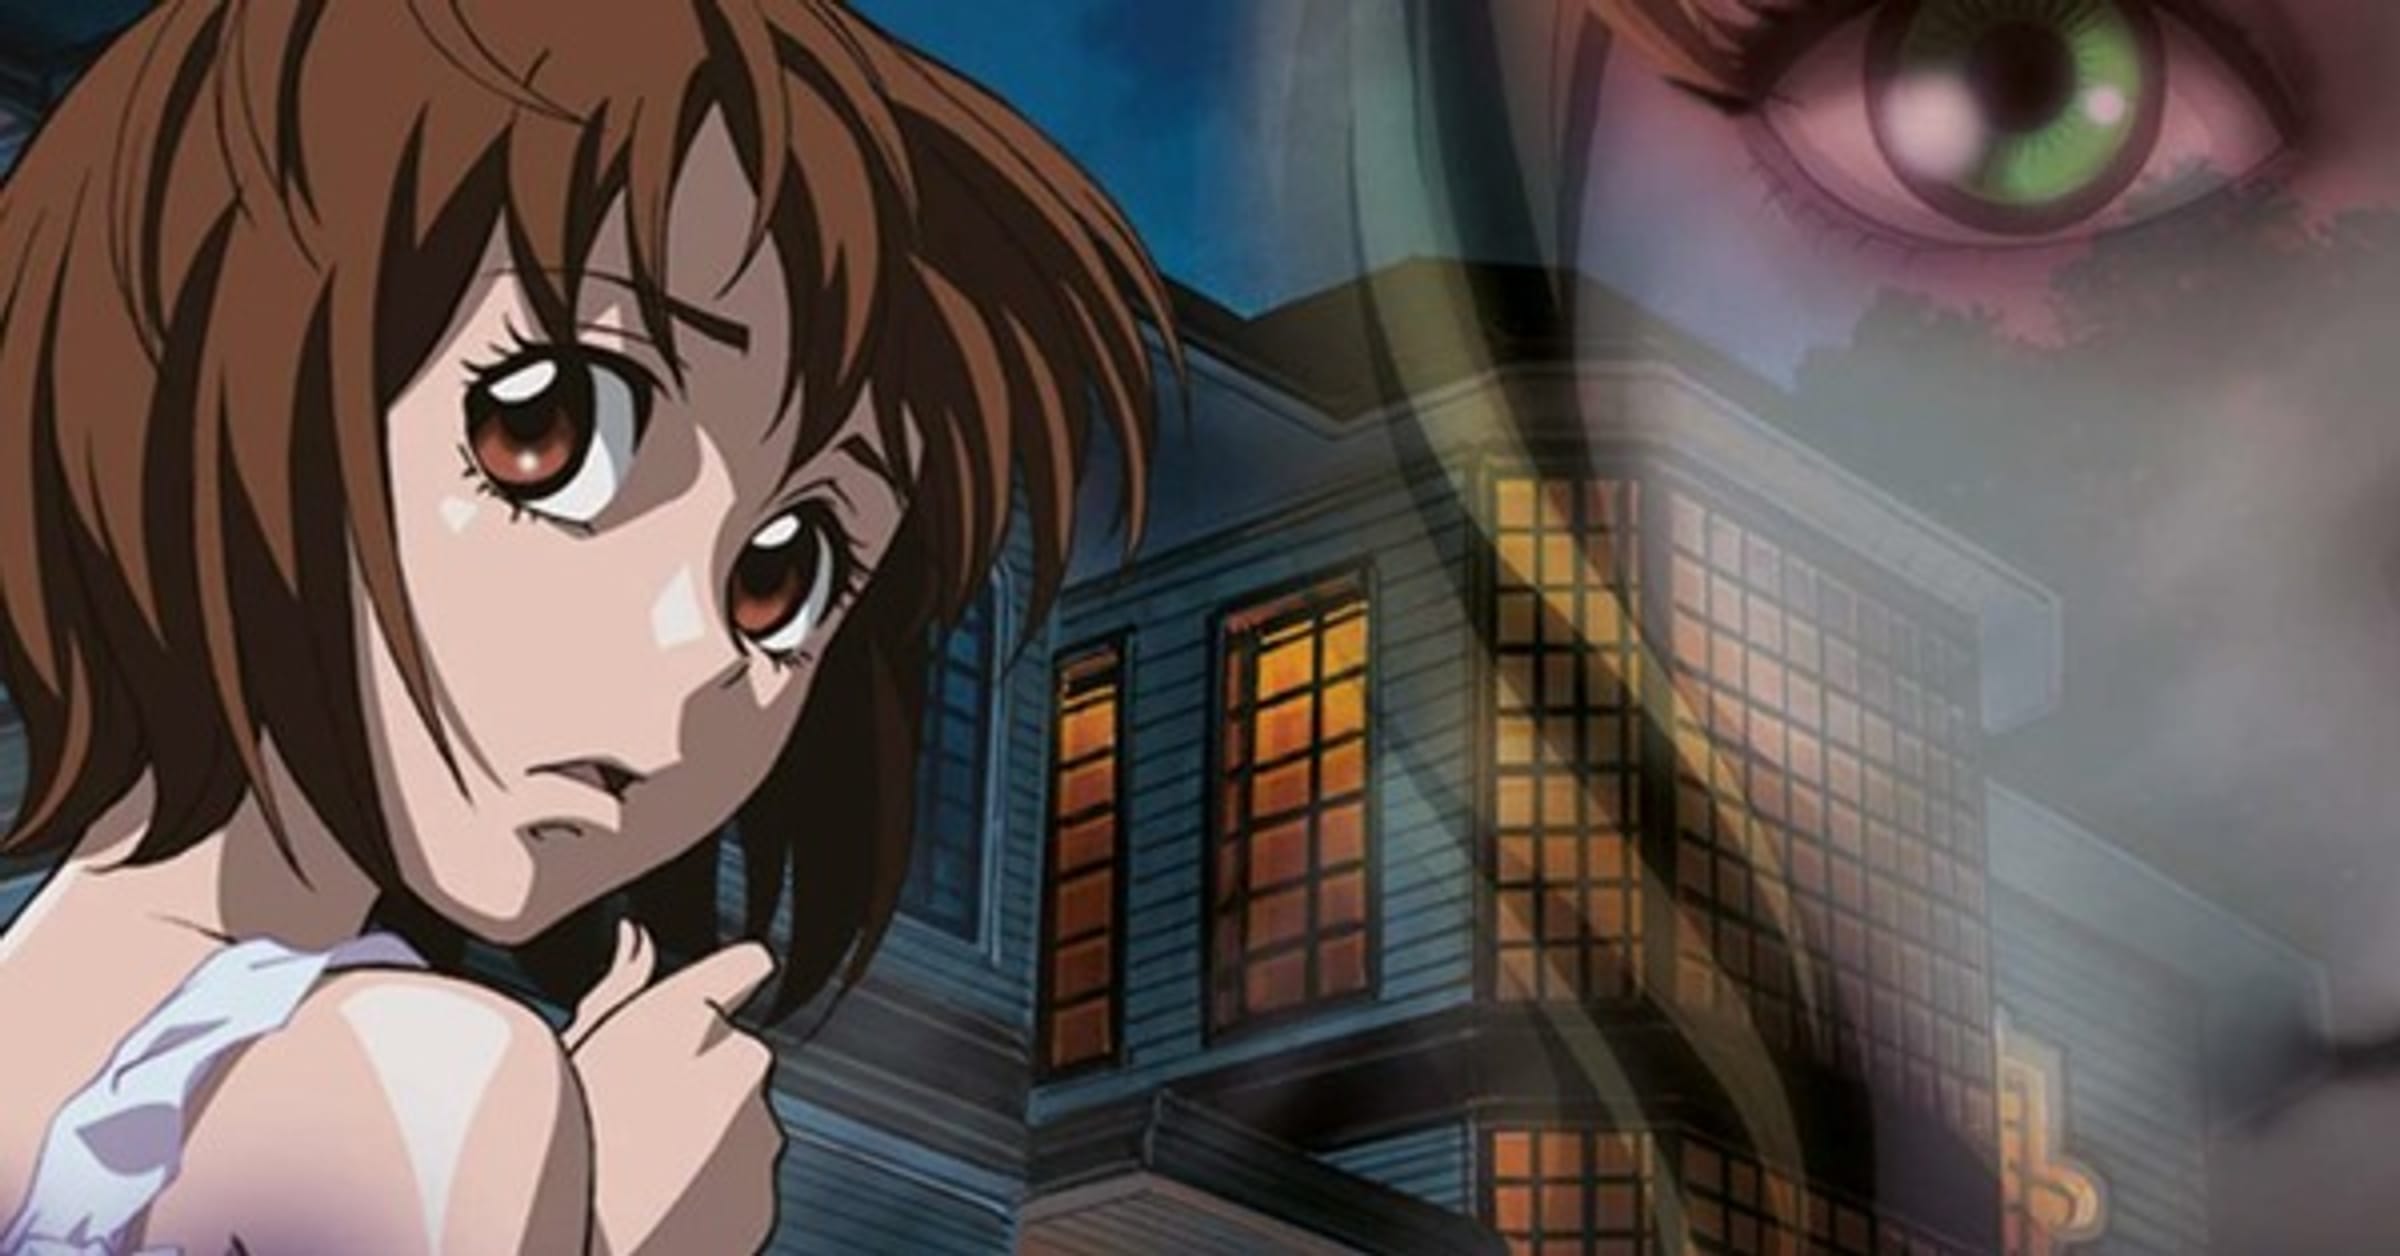 Best Ghost Anime List  Popular Anime About Ghost Hunters